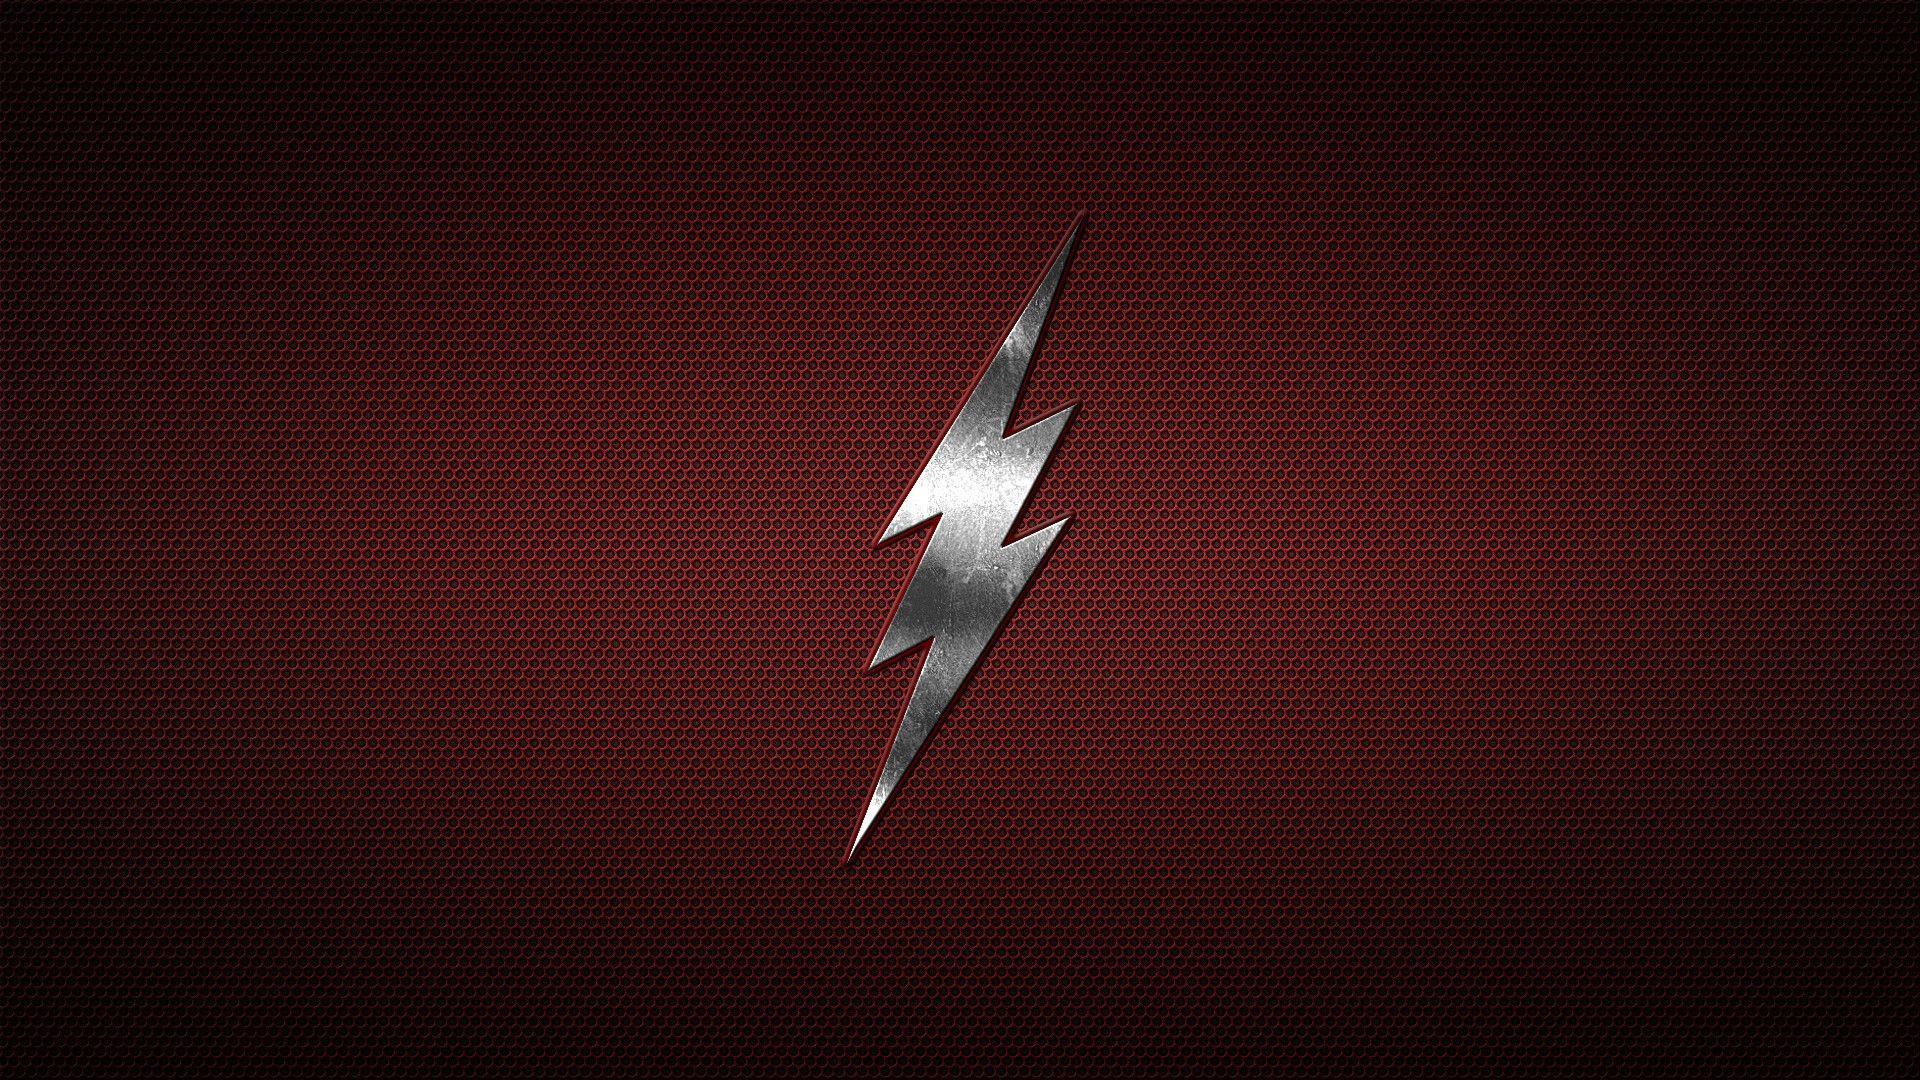 The Flash HD Wallpaper Desktop Image and Photo